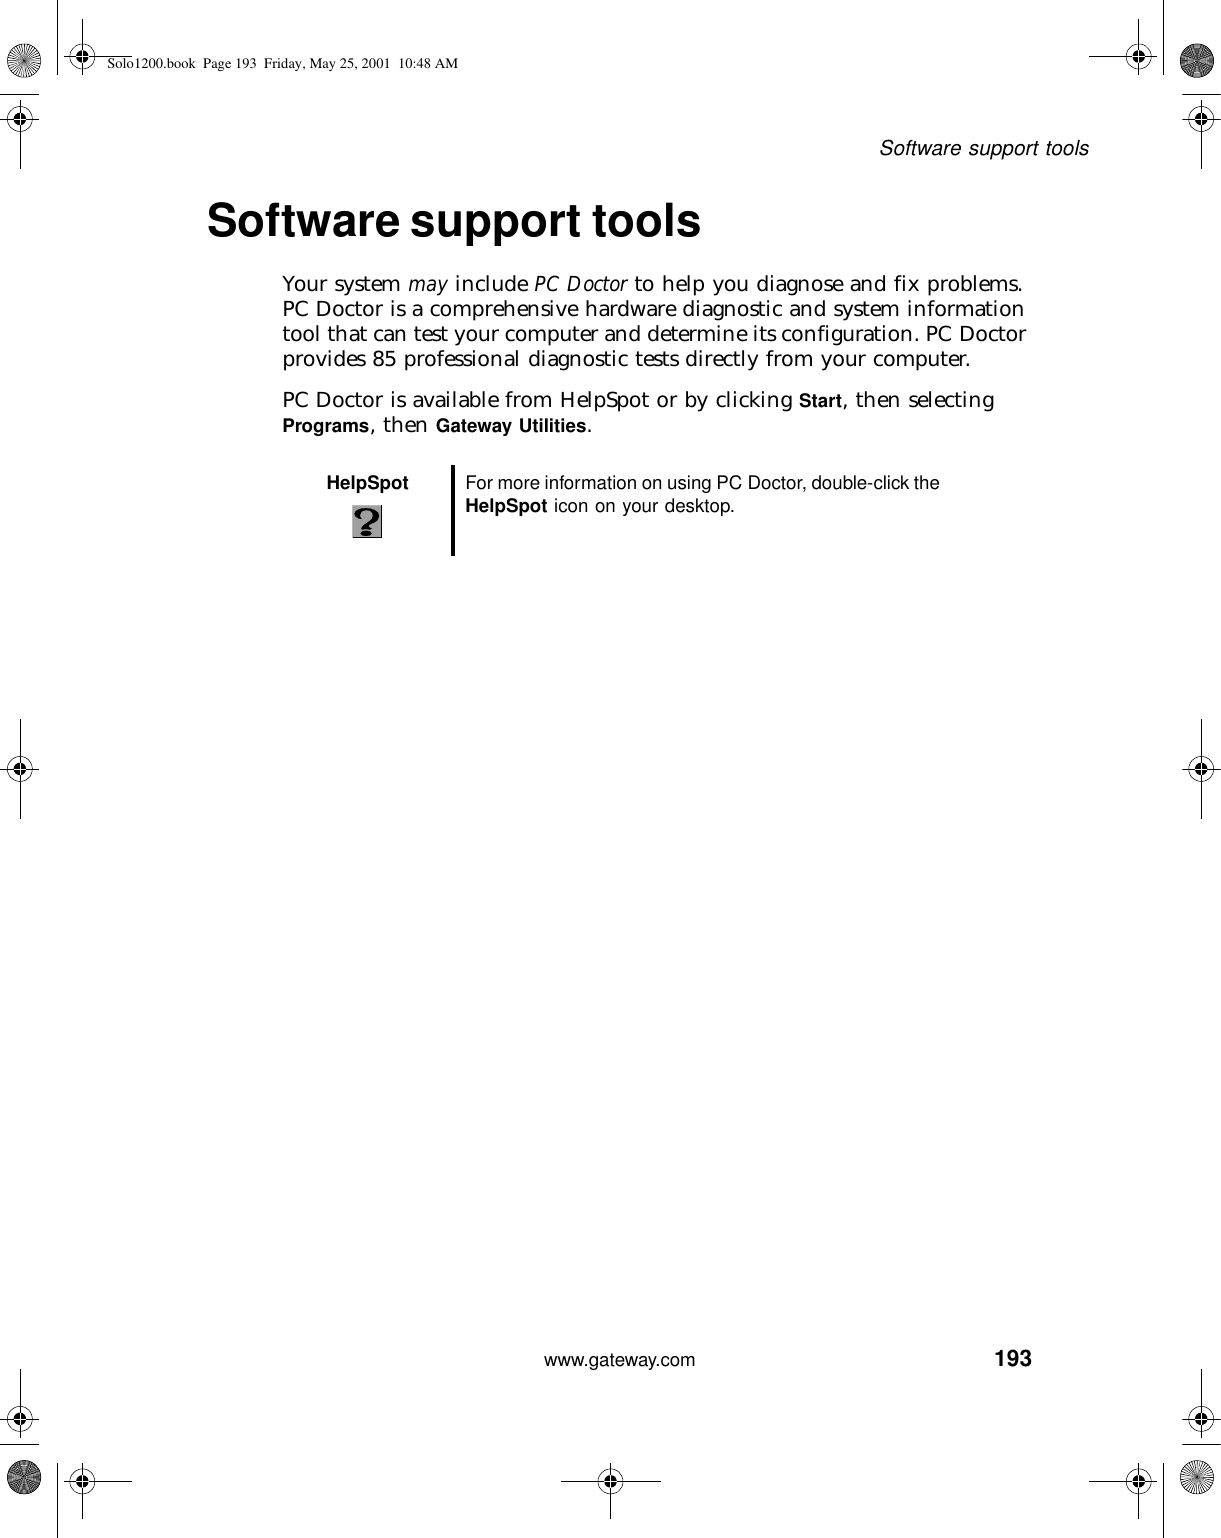 193Software support toolswww.gateway.comSoftware support toolsYour system may include PC Doctor to help you diagnose and fix problems. PC Doctor is a comprehensive hardware diagnostic and system information tool that can test your computer and determine its configuration. PC Doctor provides 85 professional diagnostic tests directly from your computer.PC Doctor is available from HelpSpot or by clicking Start, then selecting Programs, then Gateway Utilities.HelpSpot For more information on using PC Doctor, double-click the HelpSpot icon on your desktop.Solo1200.book Page 193 Friday, May 25, 2001 10:48 AM